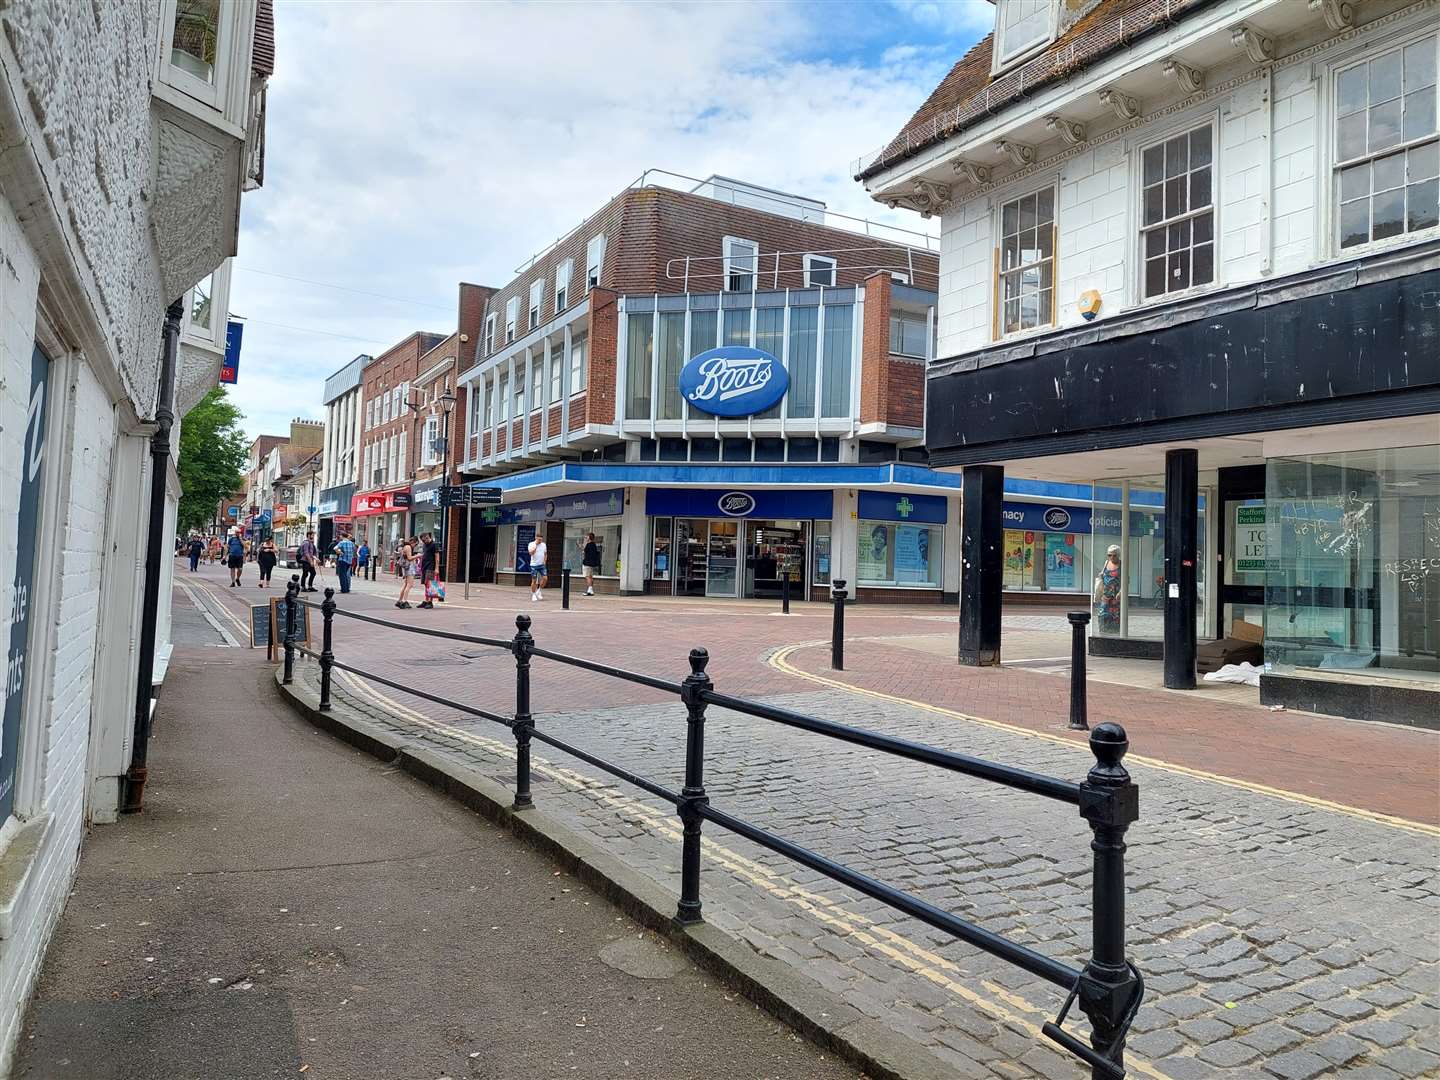 A dispersal order has brought in for the next 24 hours in Ashford town centre after several reports of anti-social behaviour